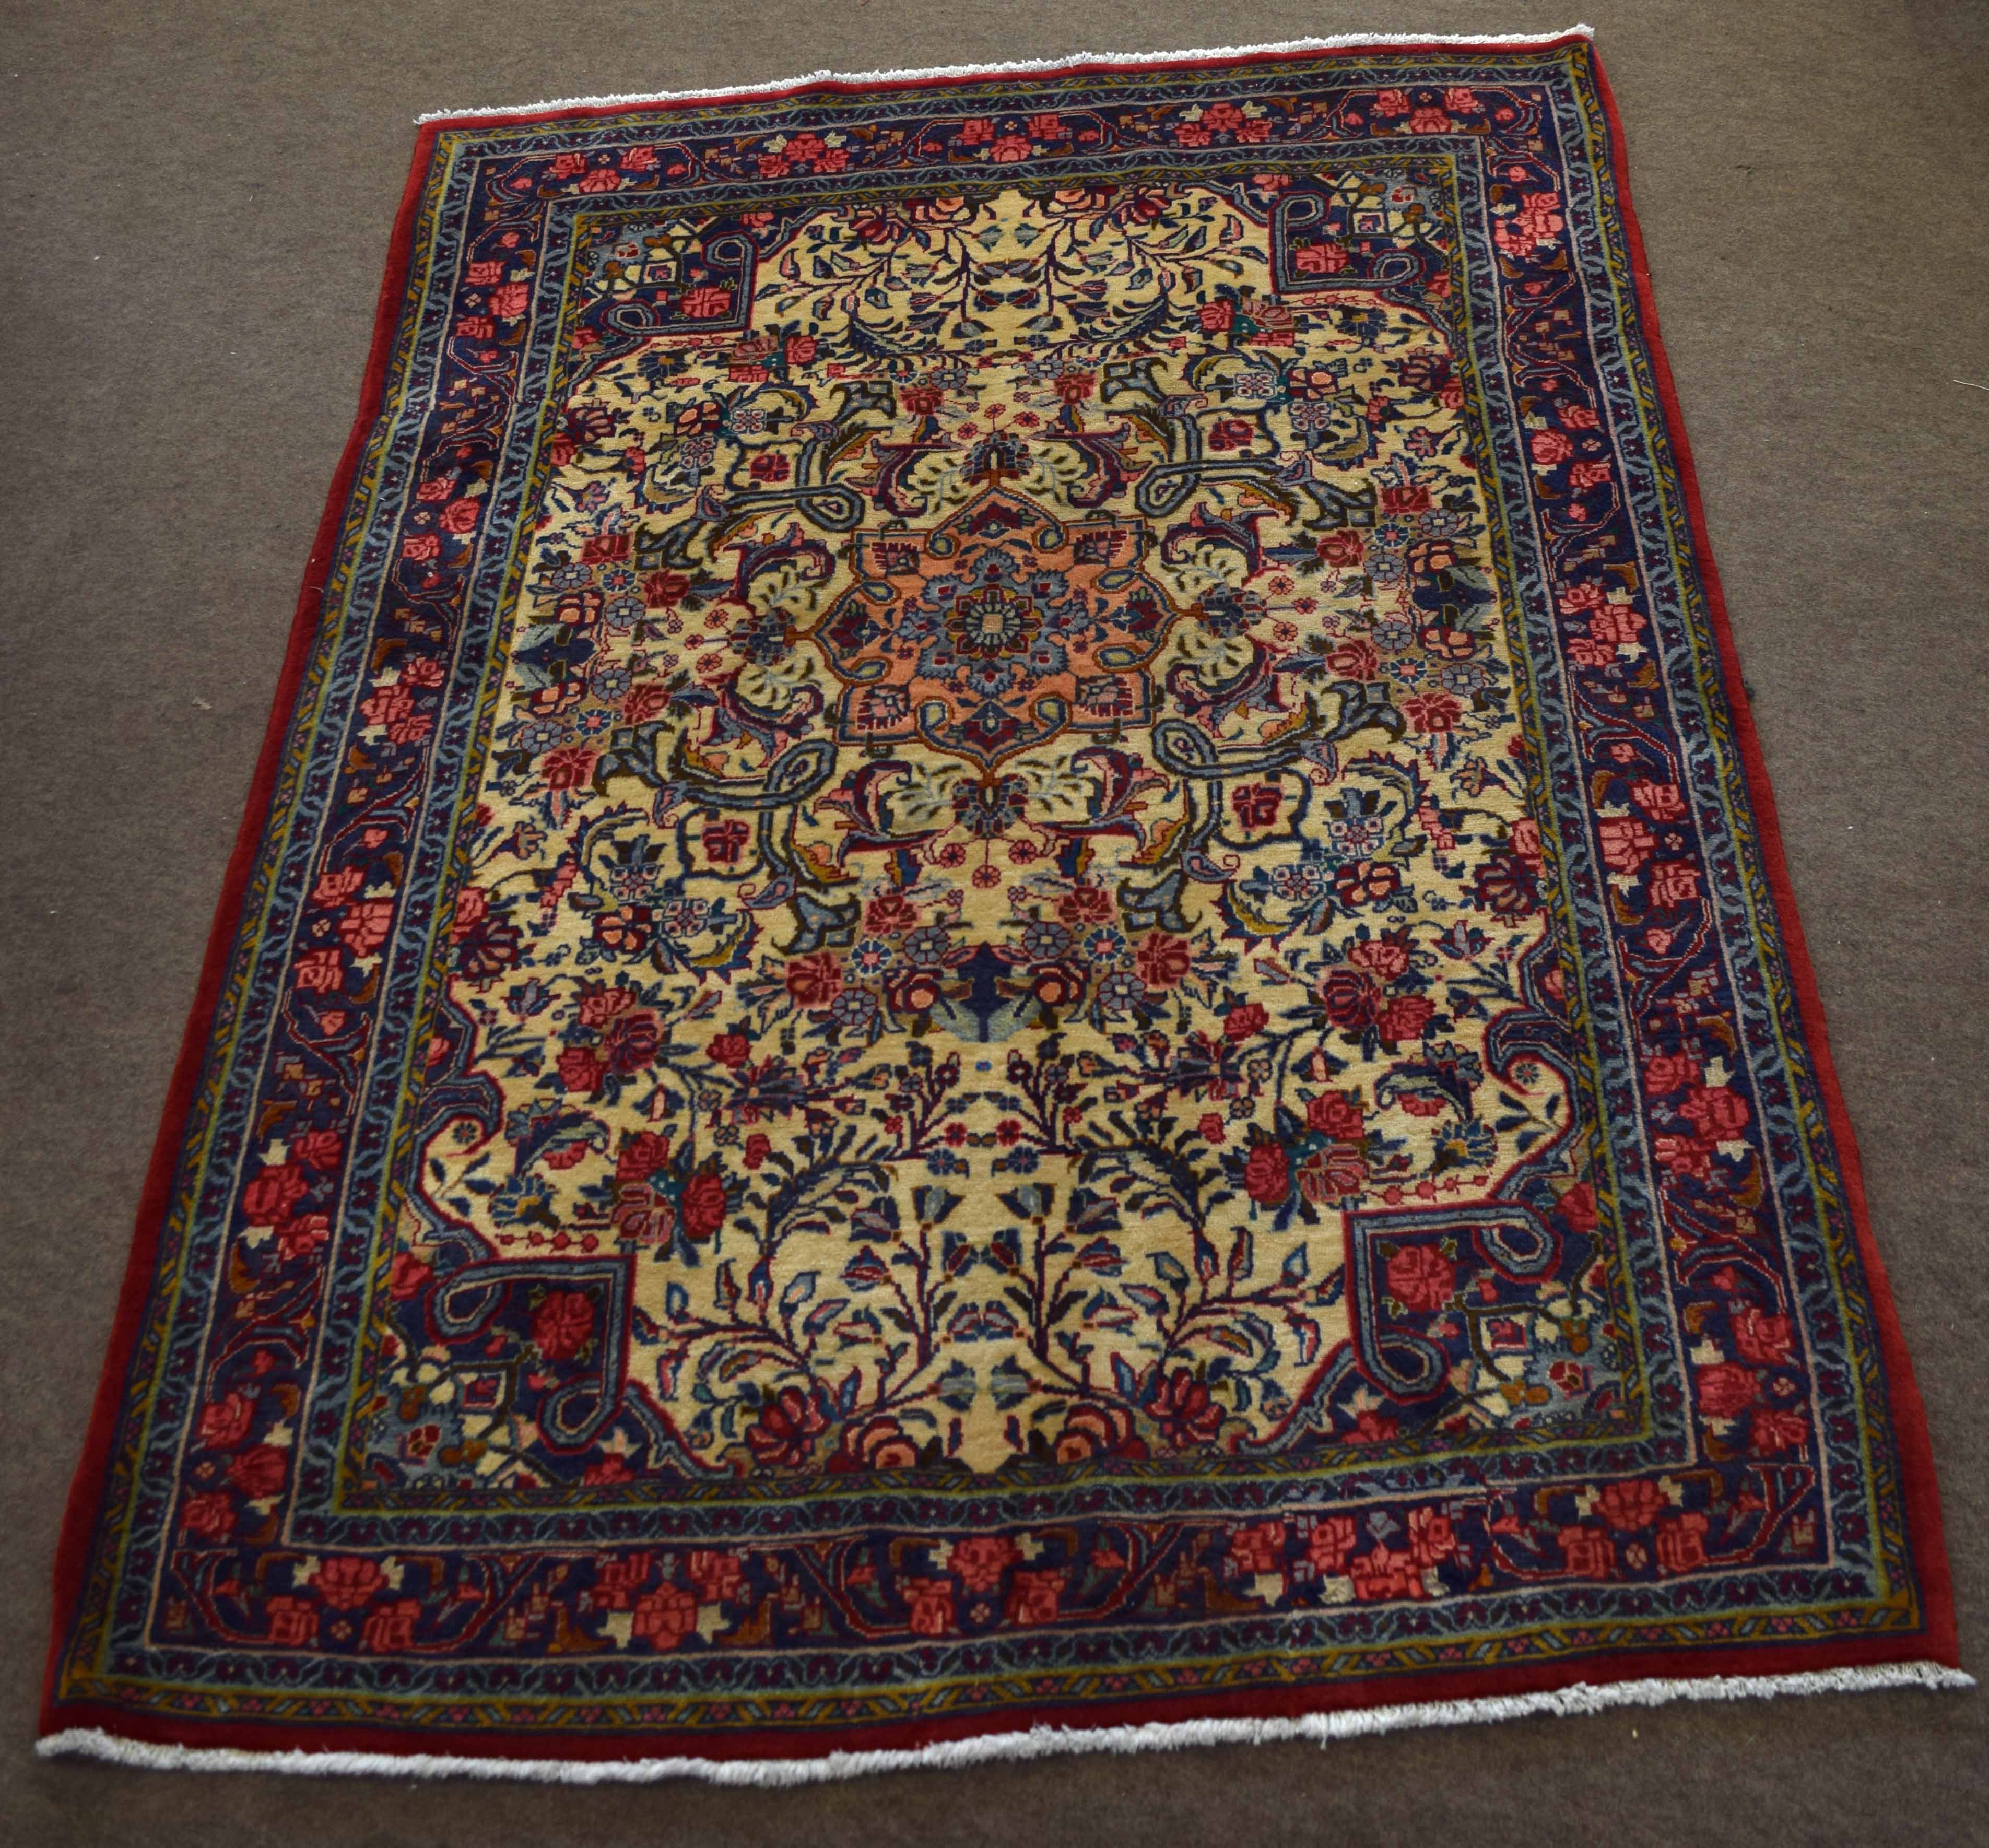 Modern caucasian rug with multi gull boarder, central panel of floral designs mainly off white and